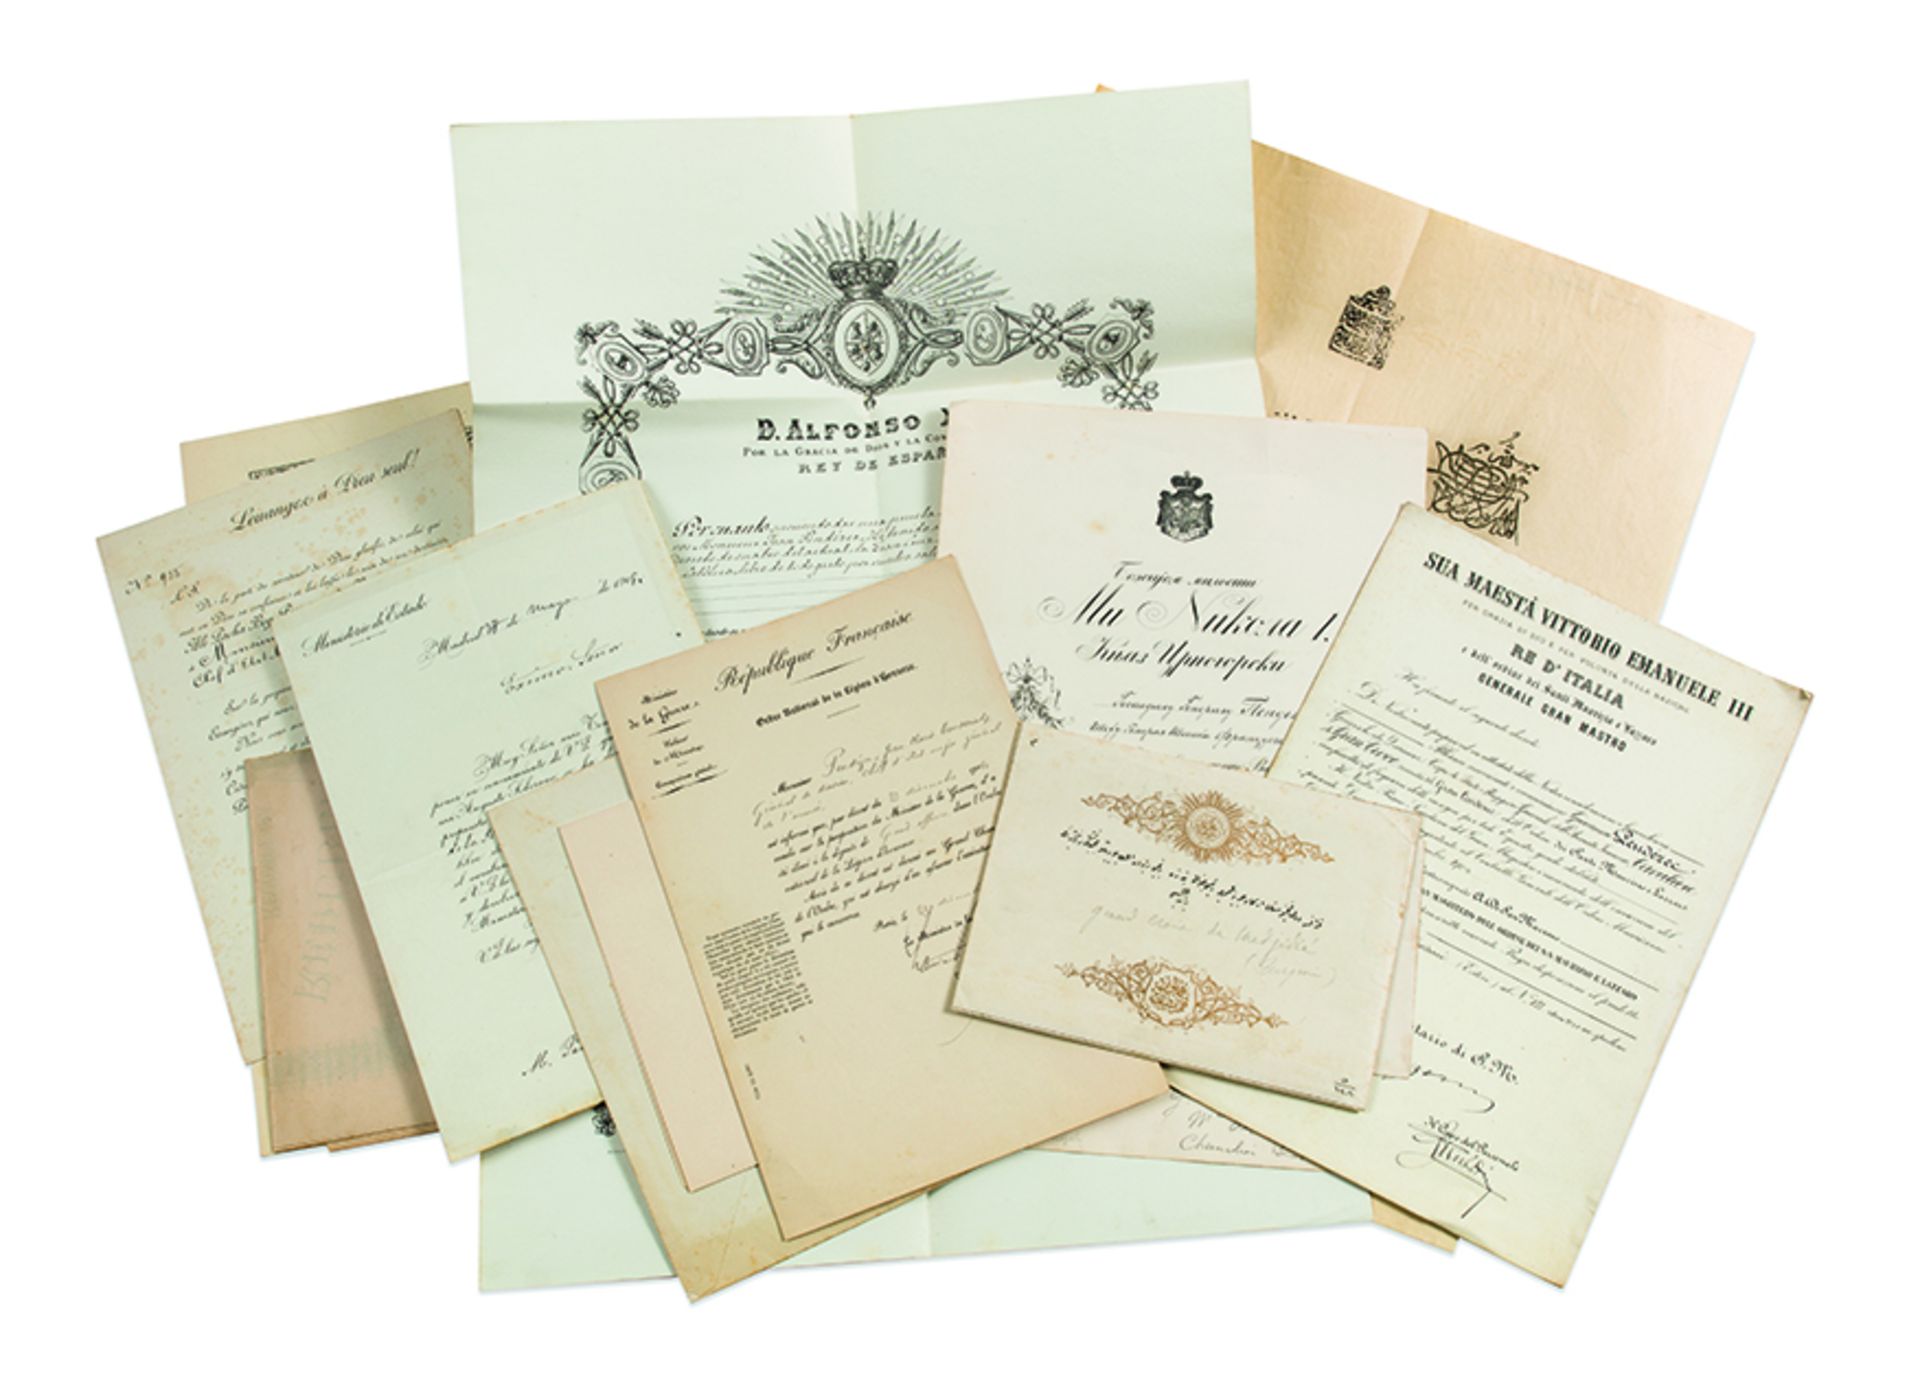 FOREIGN DECORATIONS. - Beautiful set of titles and foreign decorations received by [...]